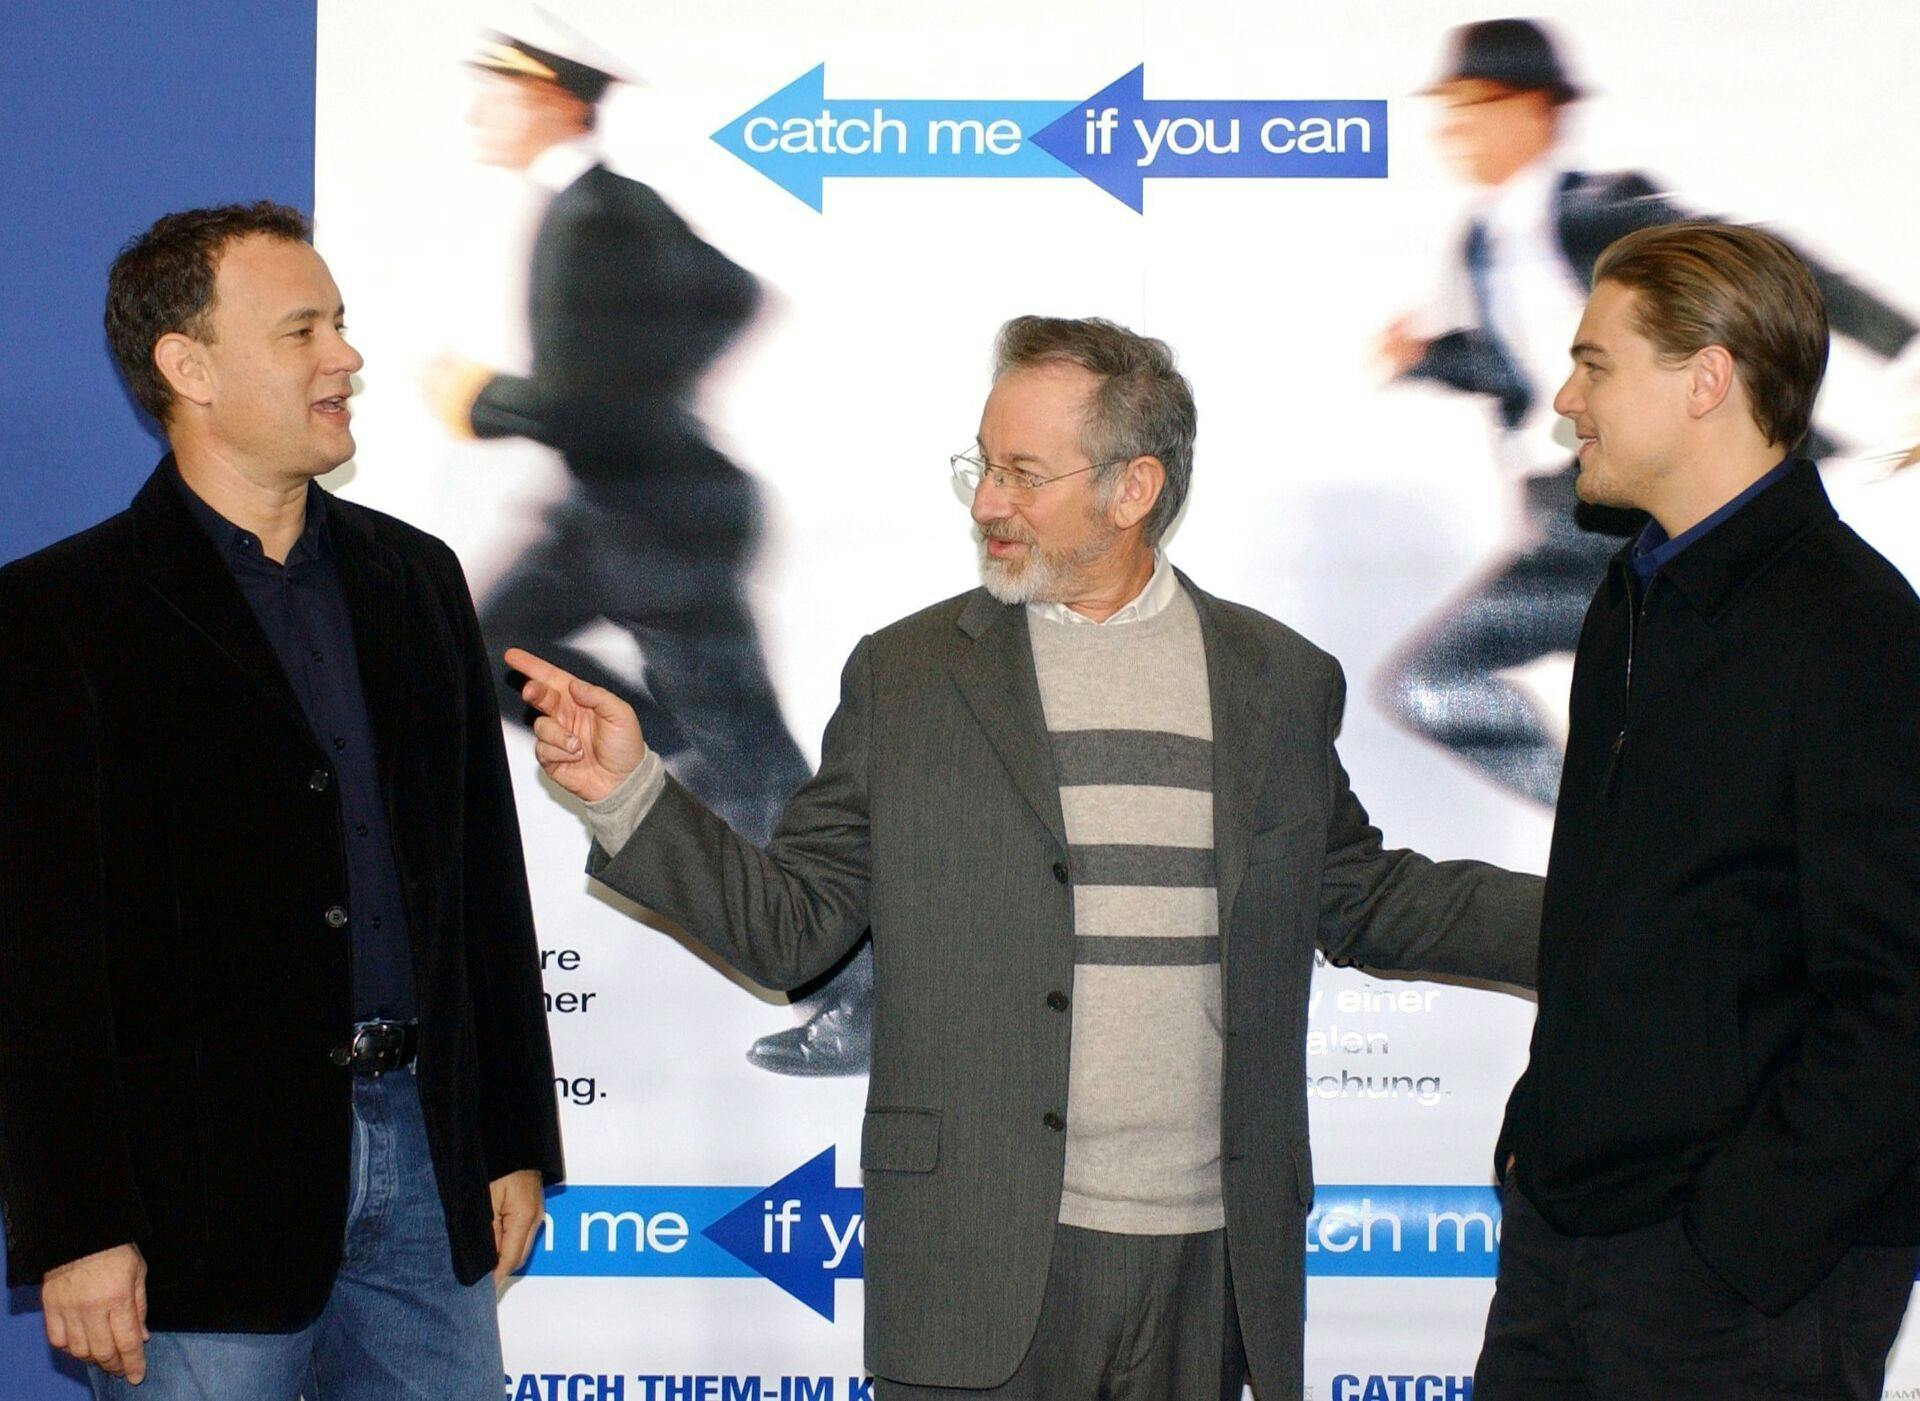 (dpa) - US actors Tom Hanks (L) and Leonardo DiCaprio (R) as well as US film director Steven Spielberg pose in front of a movie poster ahead of the German premiere of their new film 'Catch Me If You Can' in Berlin, 26 January 2003. The film, based on a true story, is about a successful con artist (DiCaprio) who manages to pass himself off as several identities while chased by the FBI agent played by Tom Hanks. Photo by: Stephanie Pilick/picture-alliance/dpa/AP Images